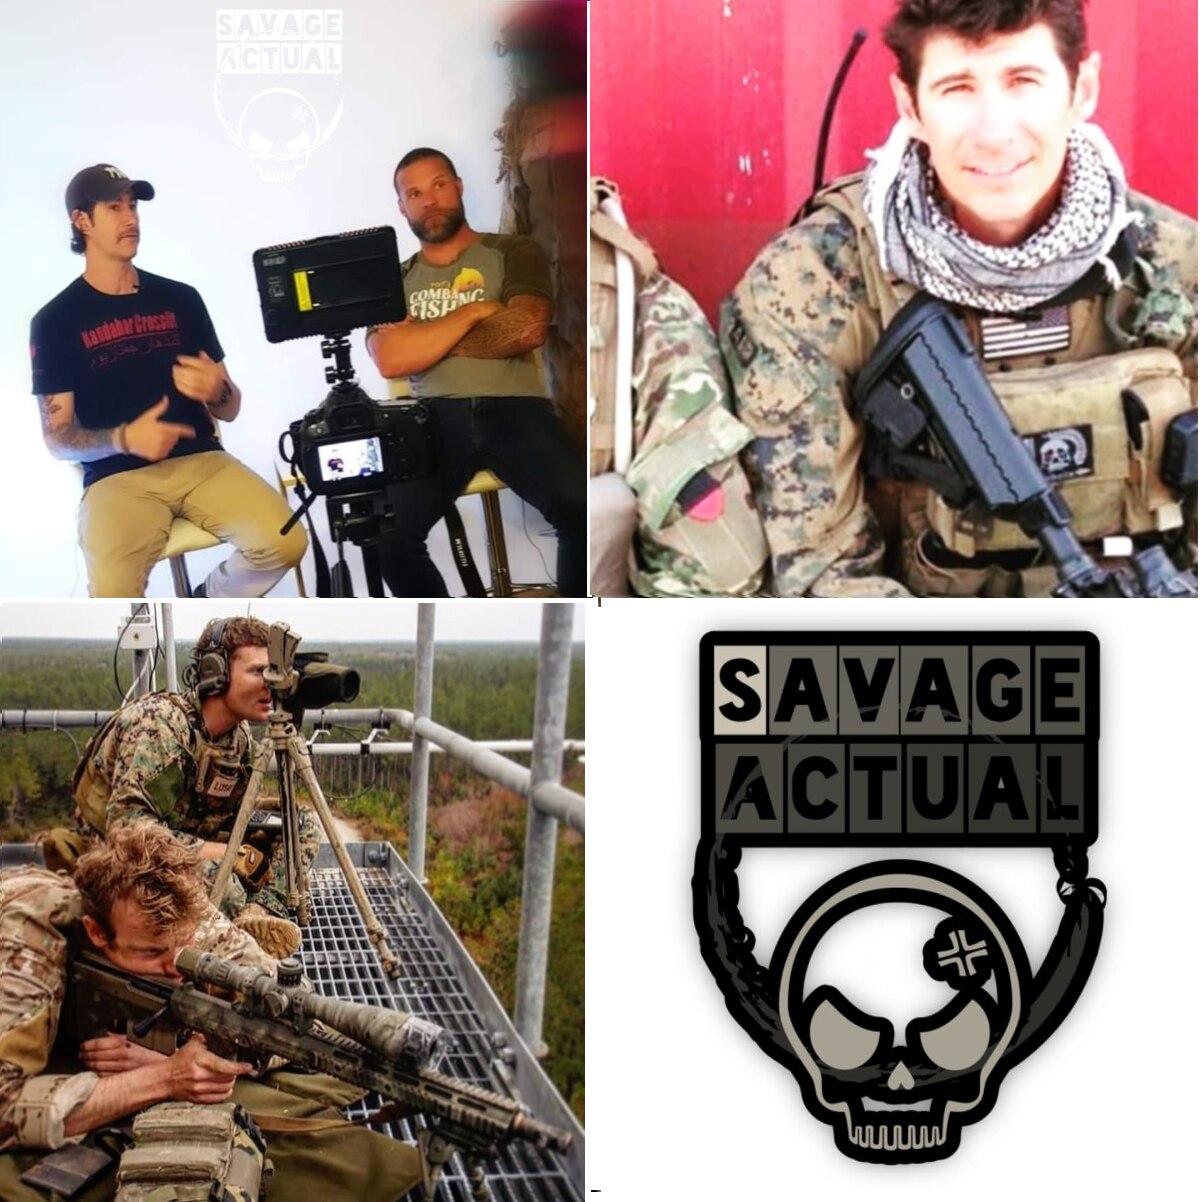 Special Operation veterans Patrick Moltrup and Jason Lilley have teamed up to create a YouTube channel, which has quickly grown to more than 80,000 subscribers. (Savage Actual YouTube page) Marine veteransâ€™ YouTube channel gives civilians a taste of special ops